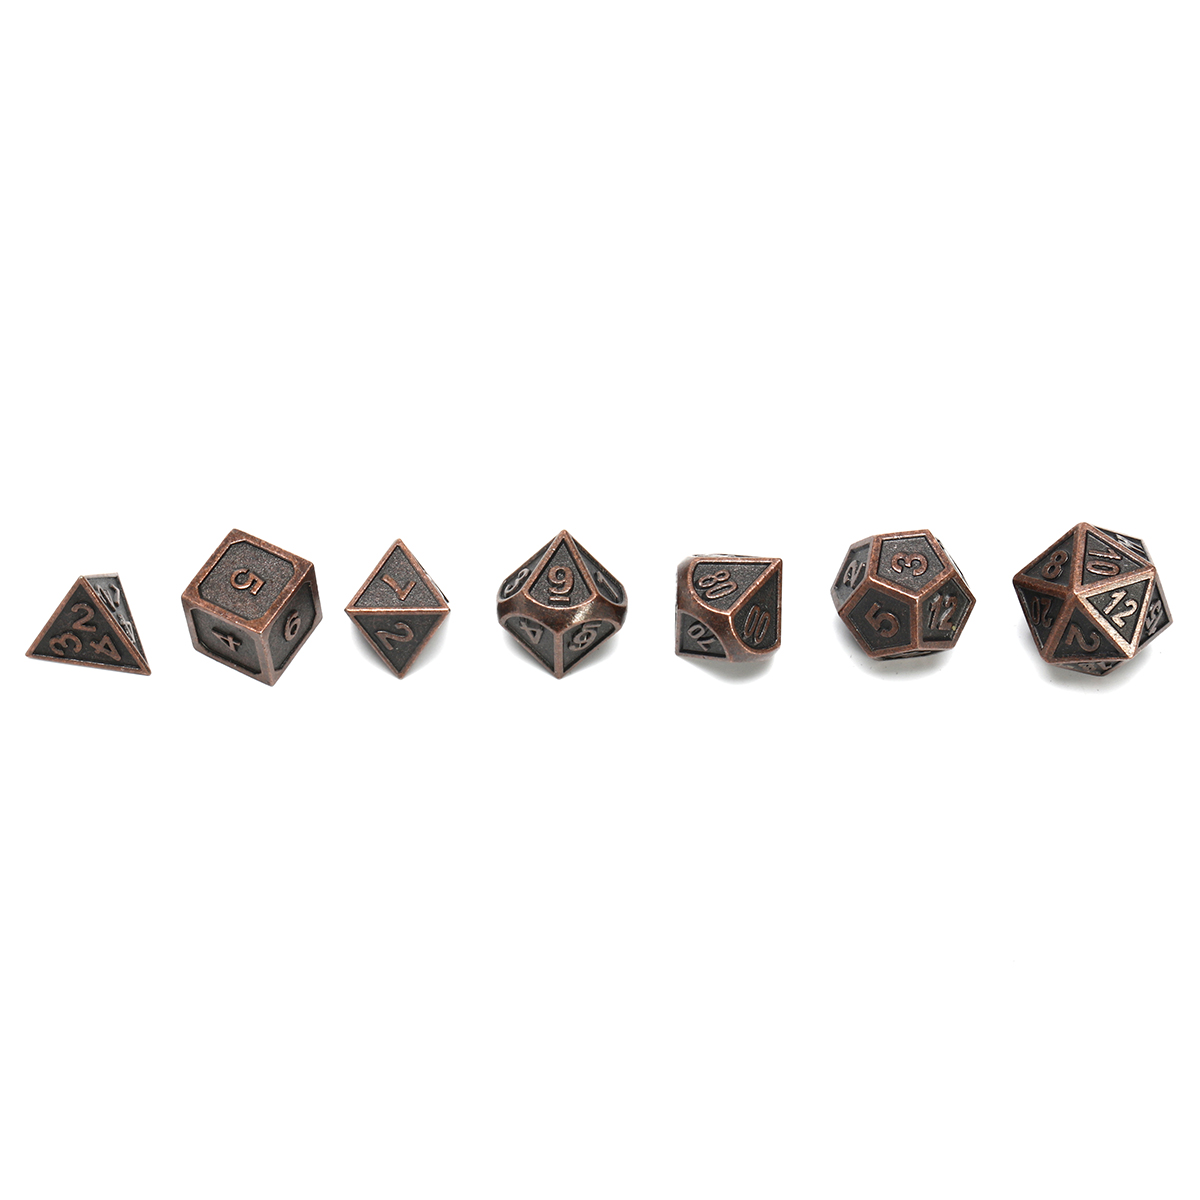 ECUBEE-Solid-Metal-Polyhedral-Dice-Antique-Color-Role-Playing-RPG-Gadget-7-Dice-Set-With-Bag-1261837